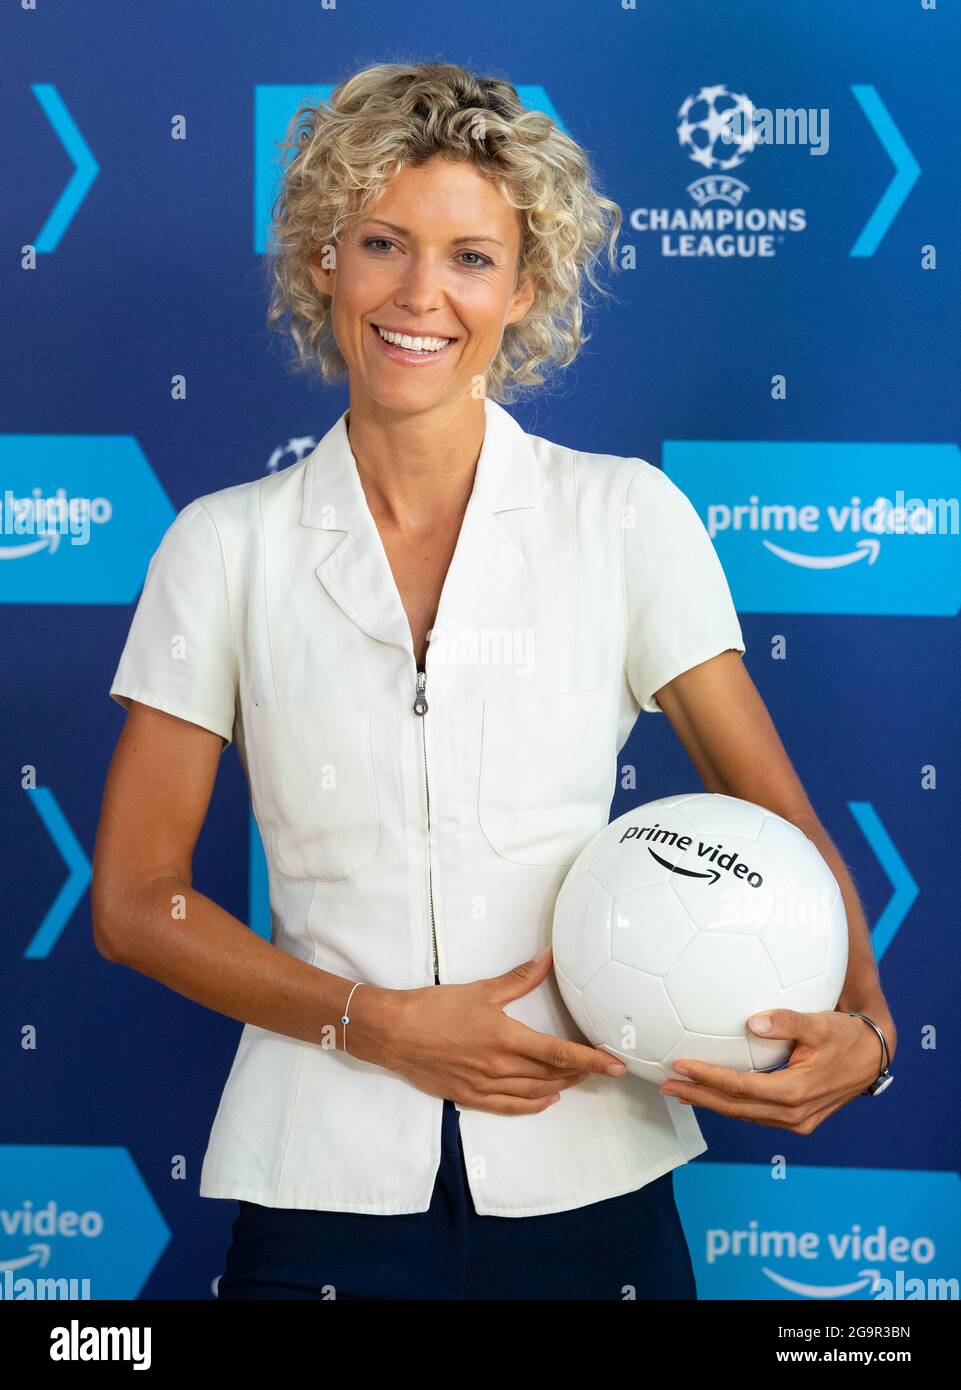 Munich, Germany. 27th July, 2021. Annika Zimmermann, presenter and reporter, takes part in a press conference of Amazon Prime Video